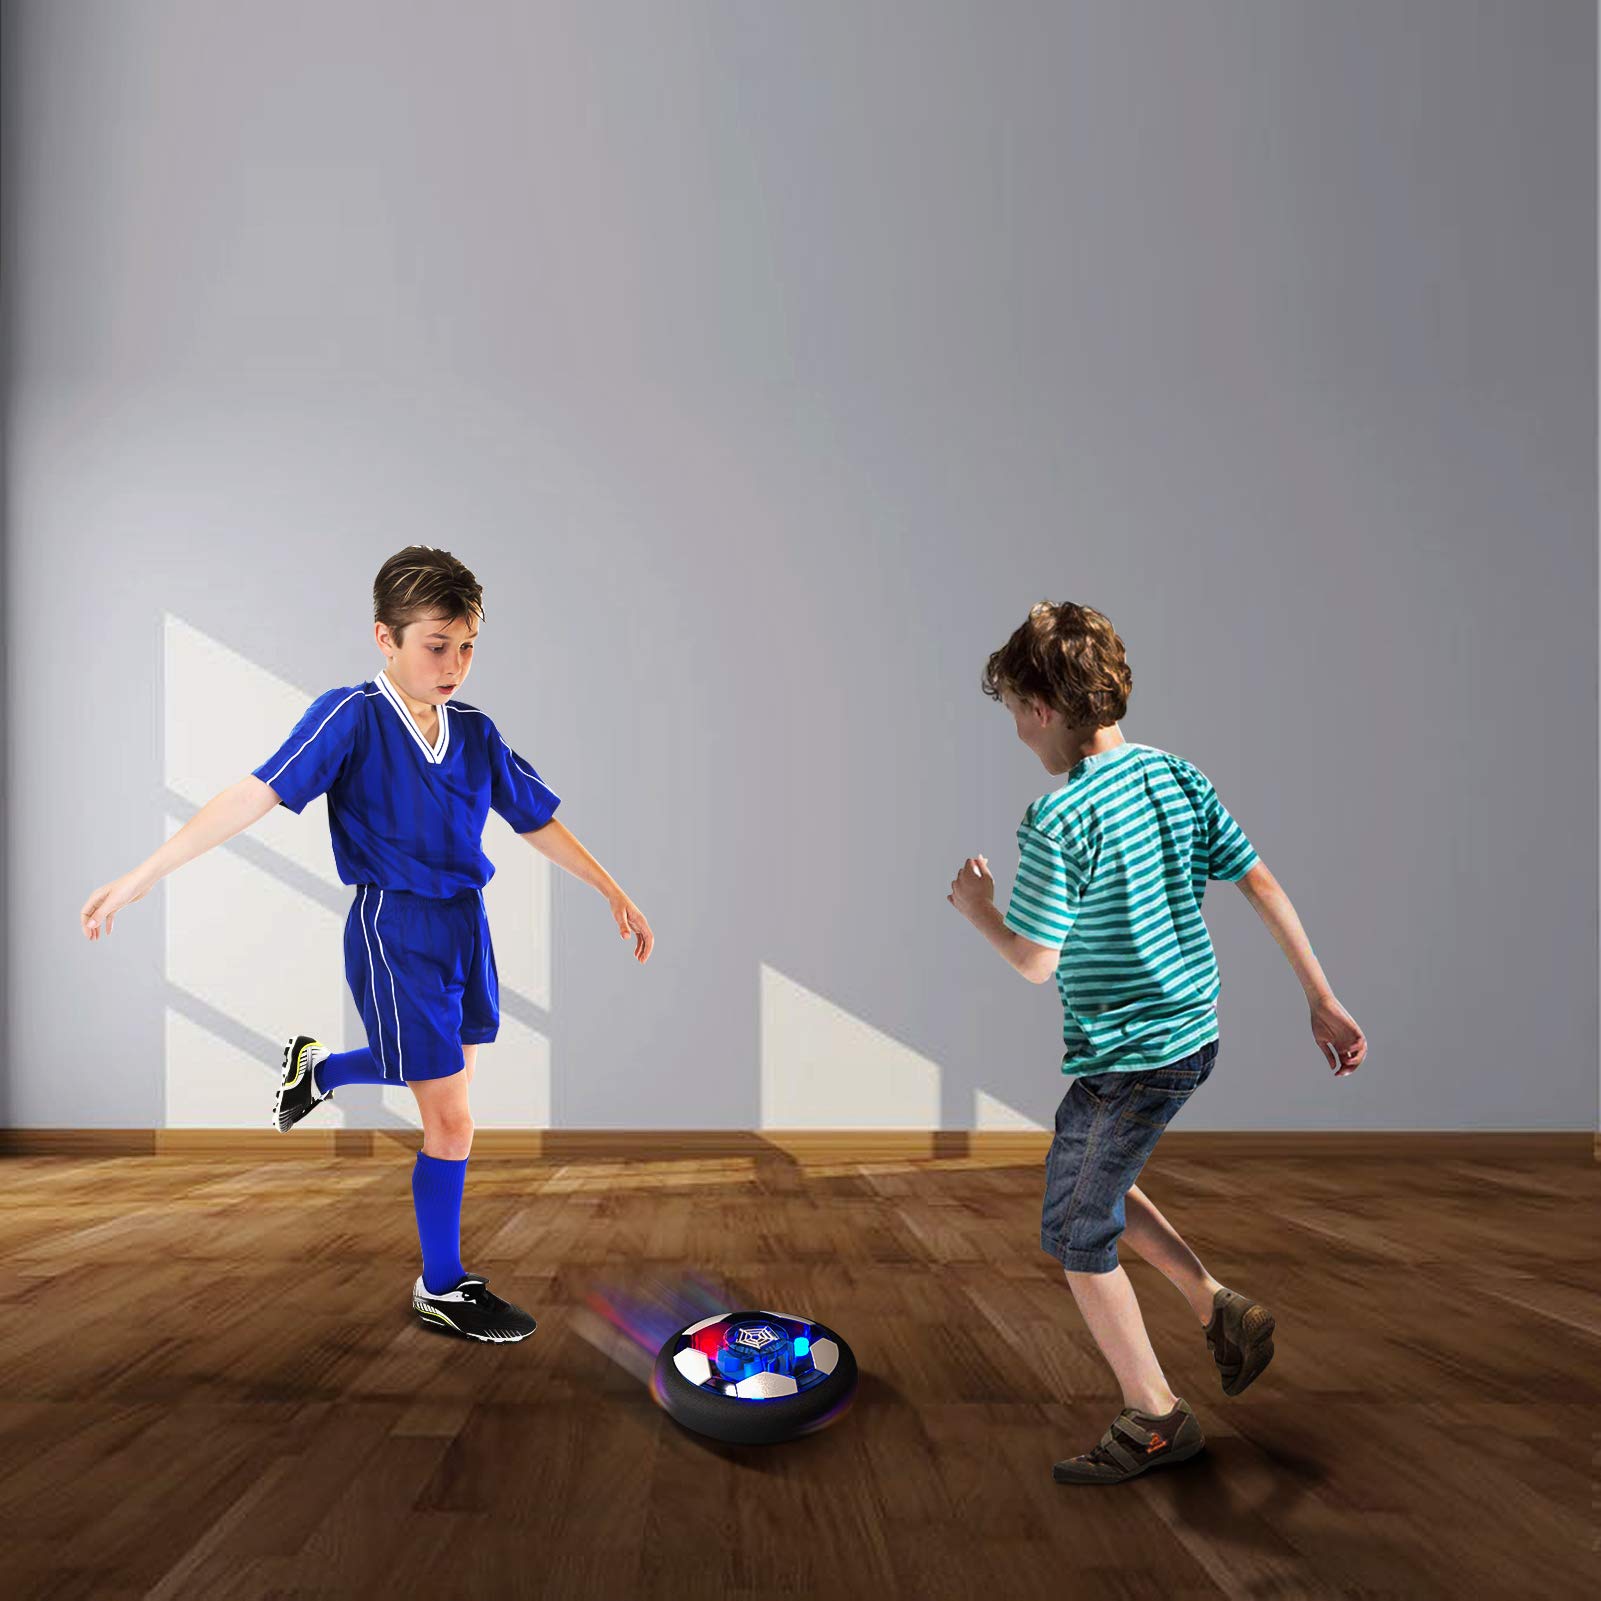 Air Power Soccer - Rechargeable Hover Ball Indoor Football With Led, Super  Fun To Play Soccer